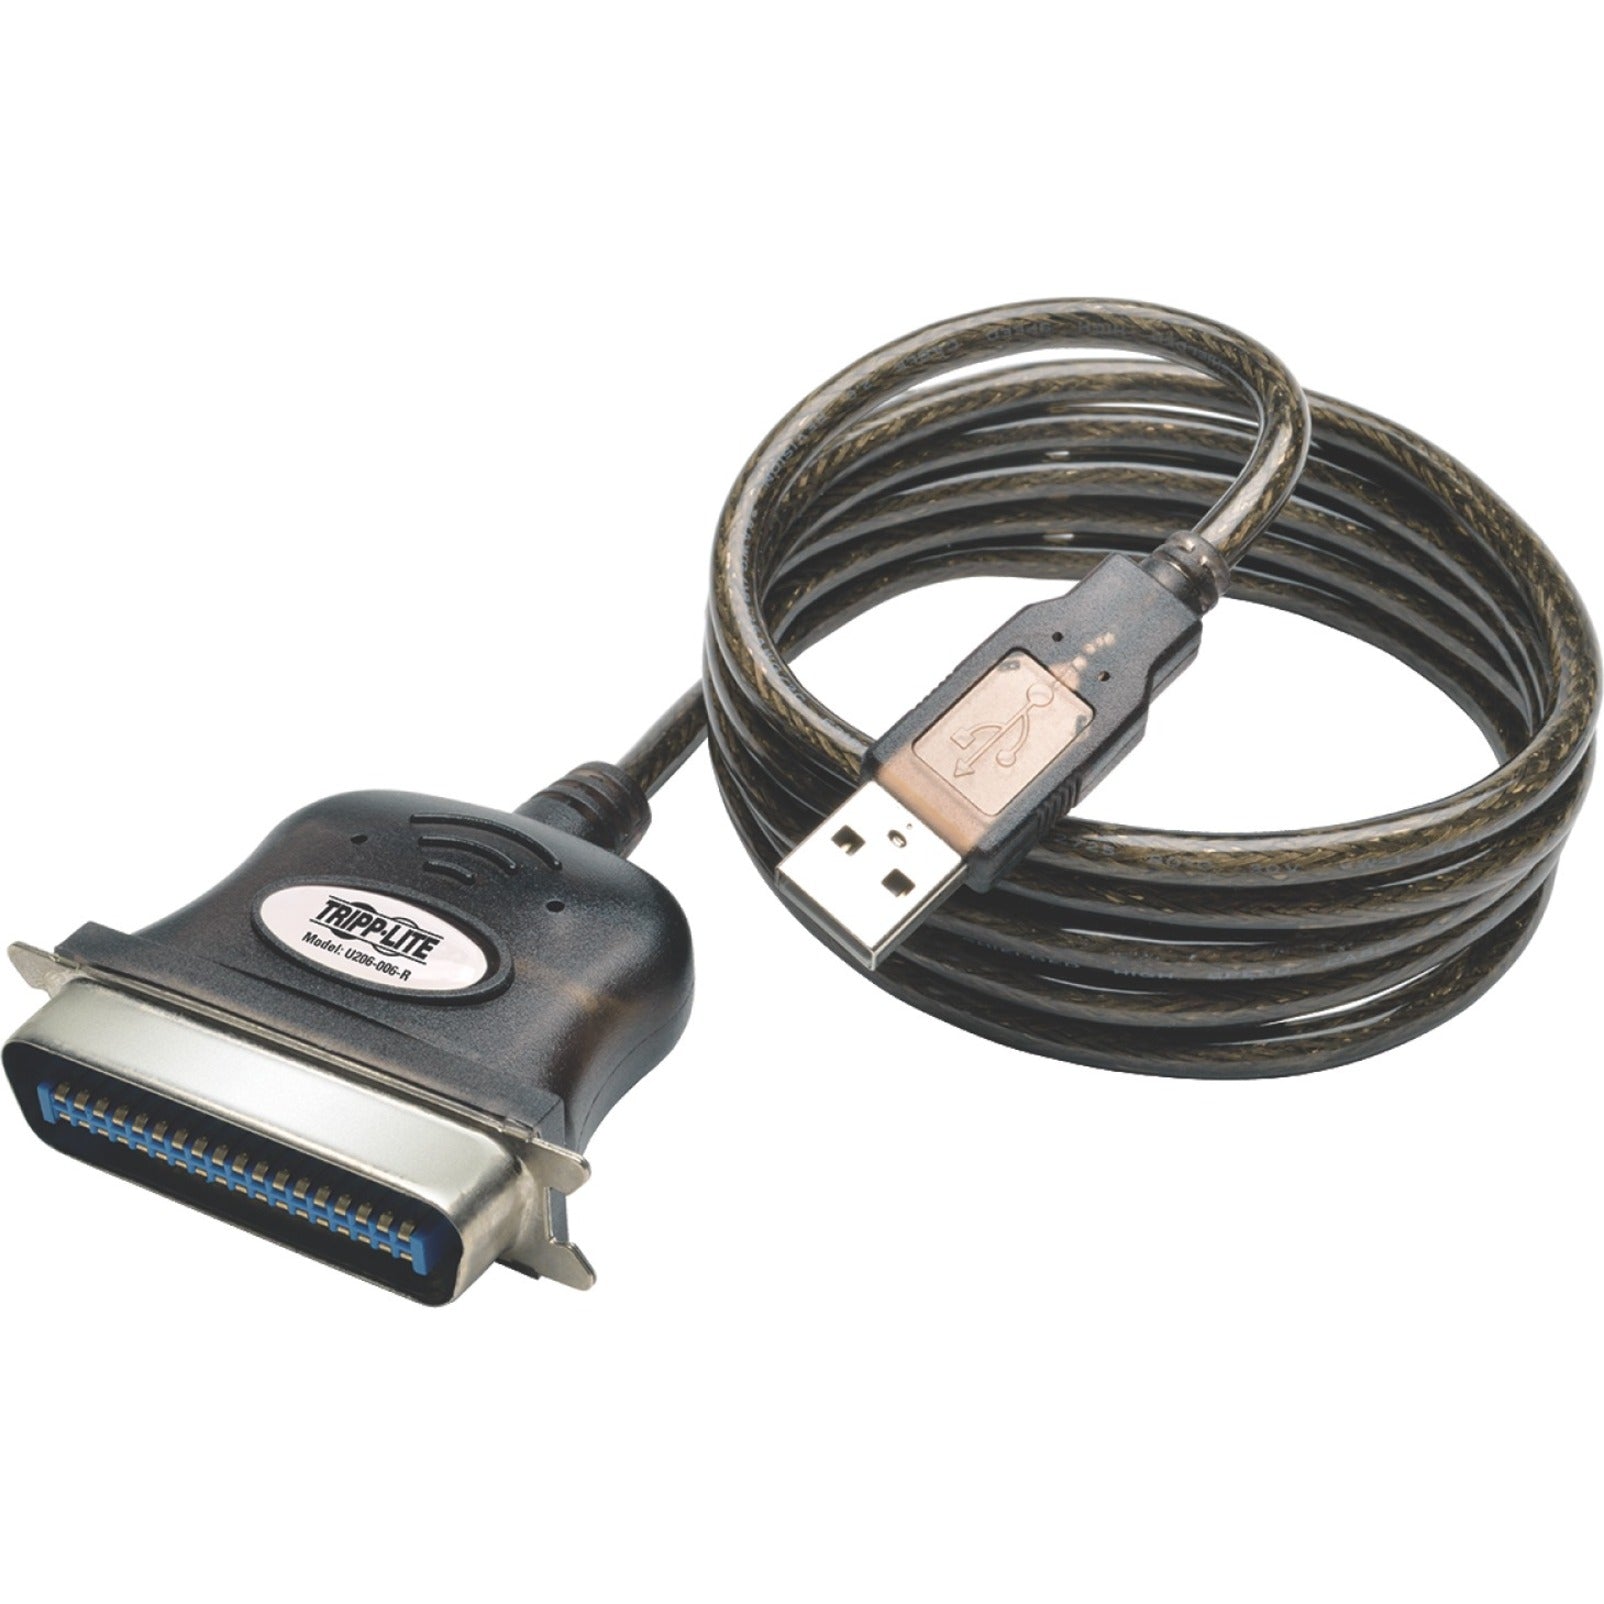 Tripp Lite U206-010 USB to Parallel Printer Cable, 10-ft, Data Transfer Cable